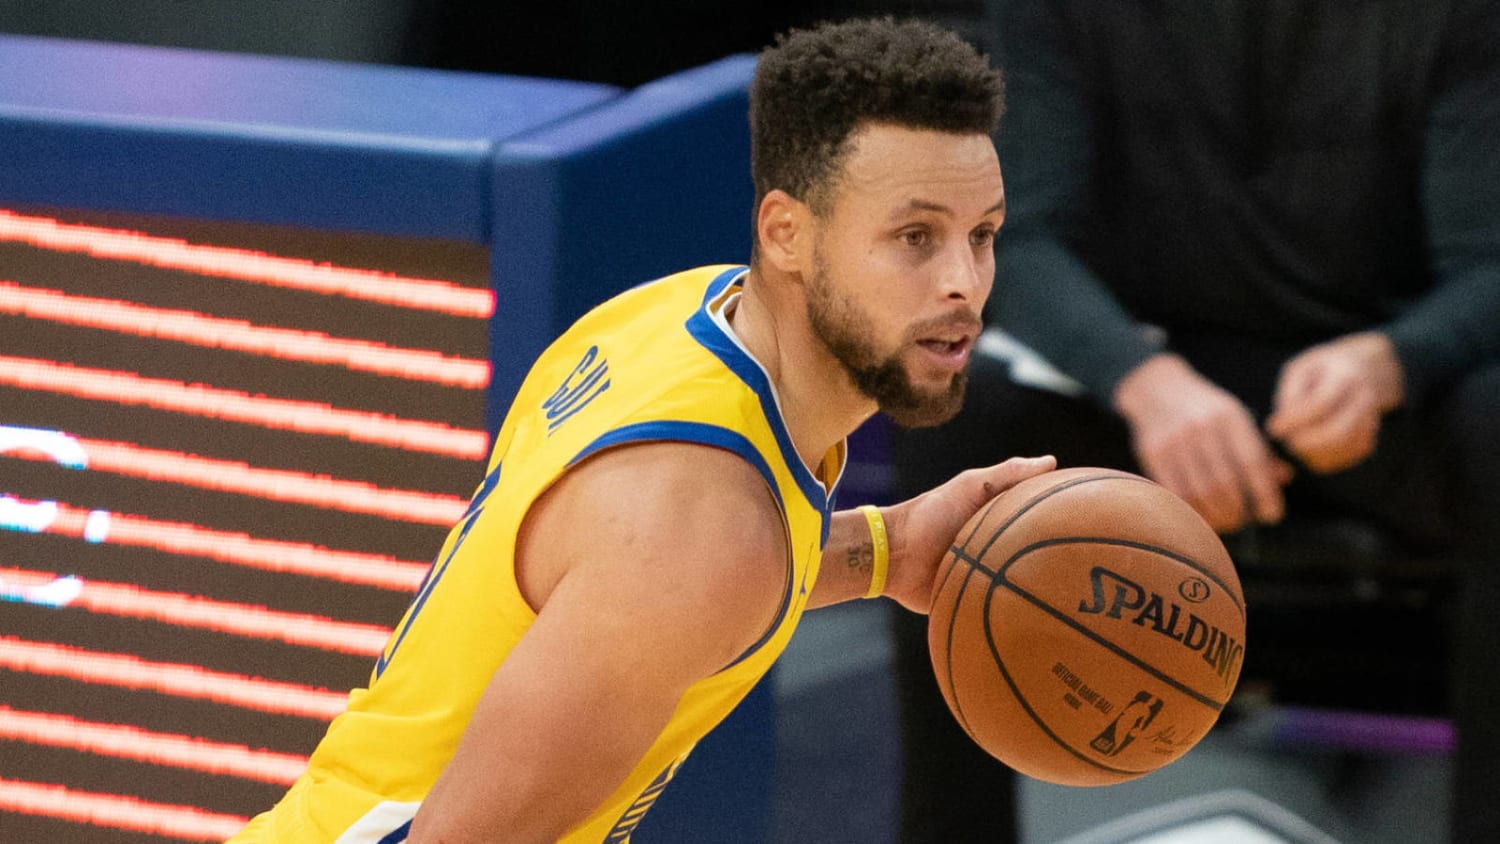 Stephen Curry on MVP talk: 'I really try not to get distracted by that'